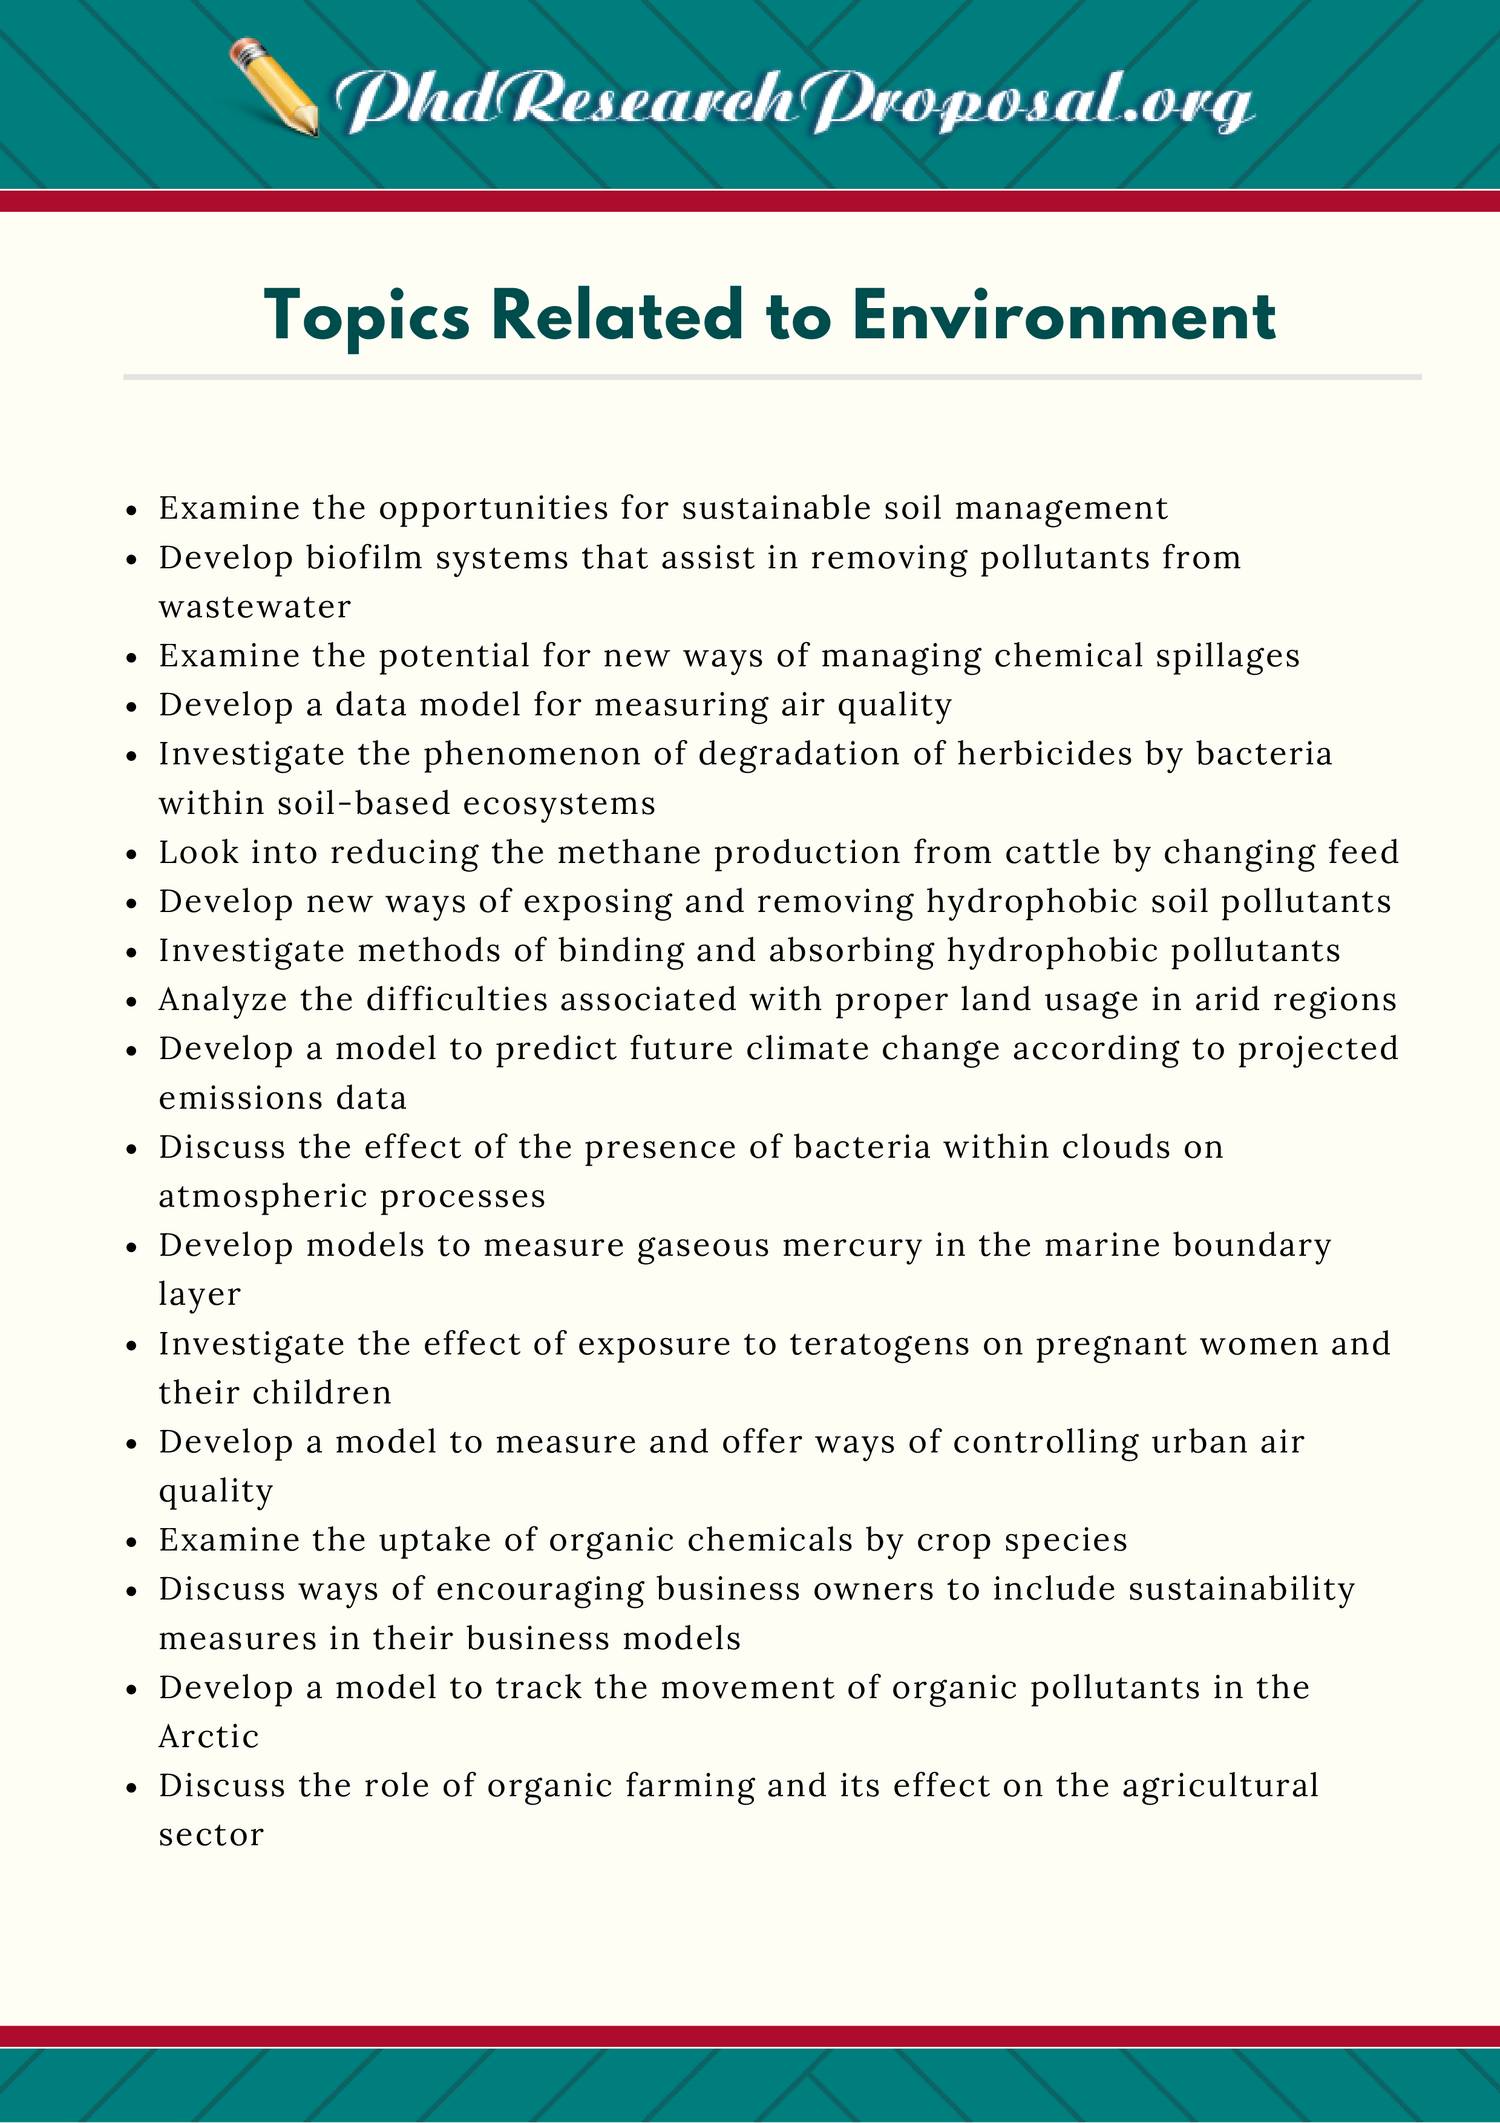 thesis topics for environmental engg